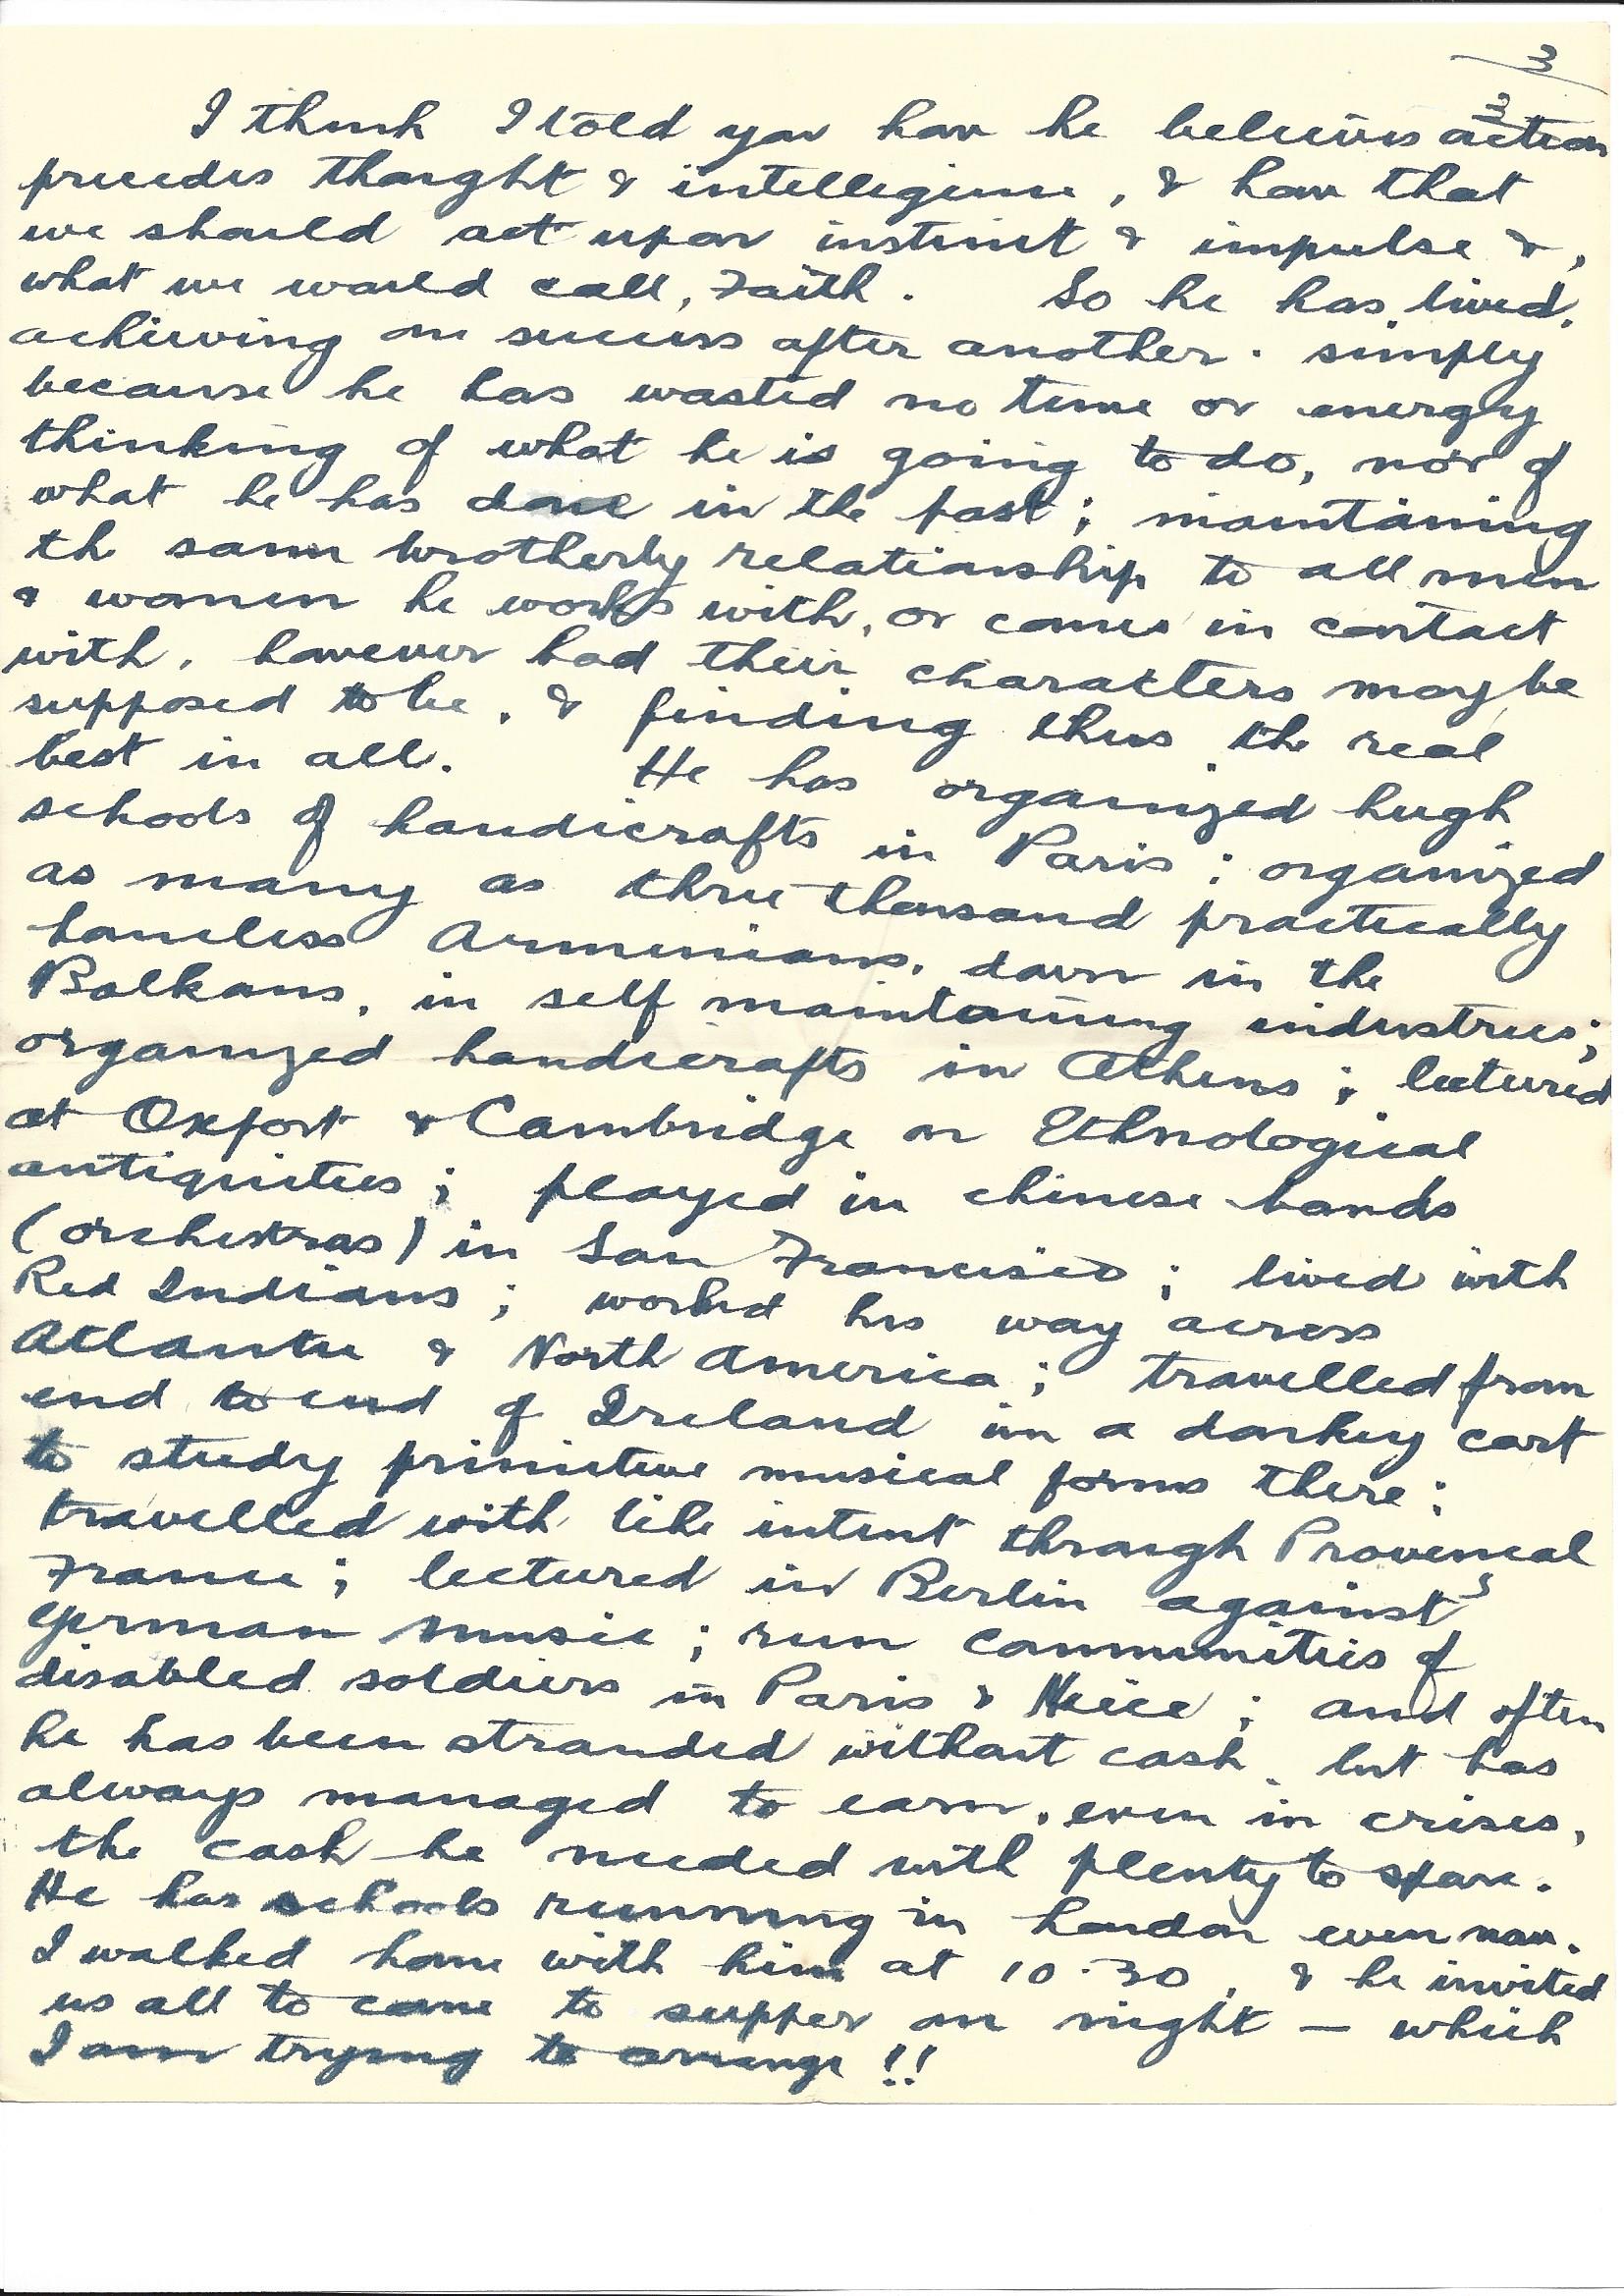 1920-01-25 page 4 letter by Donald Bearman